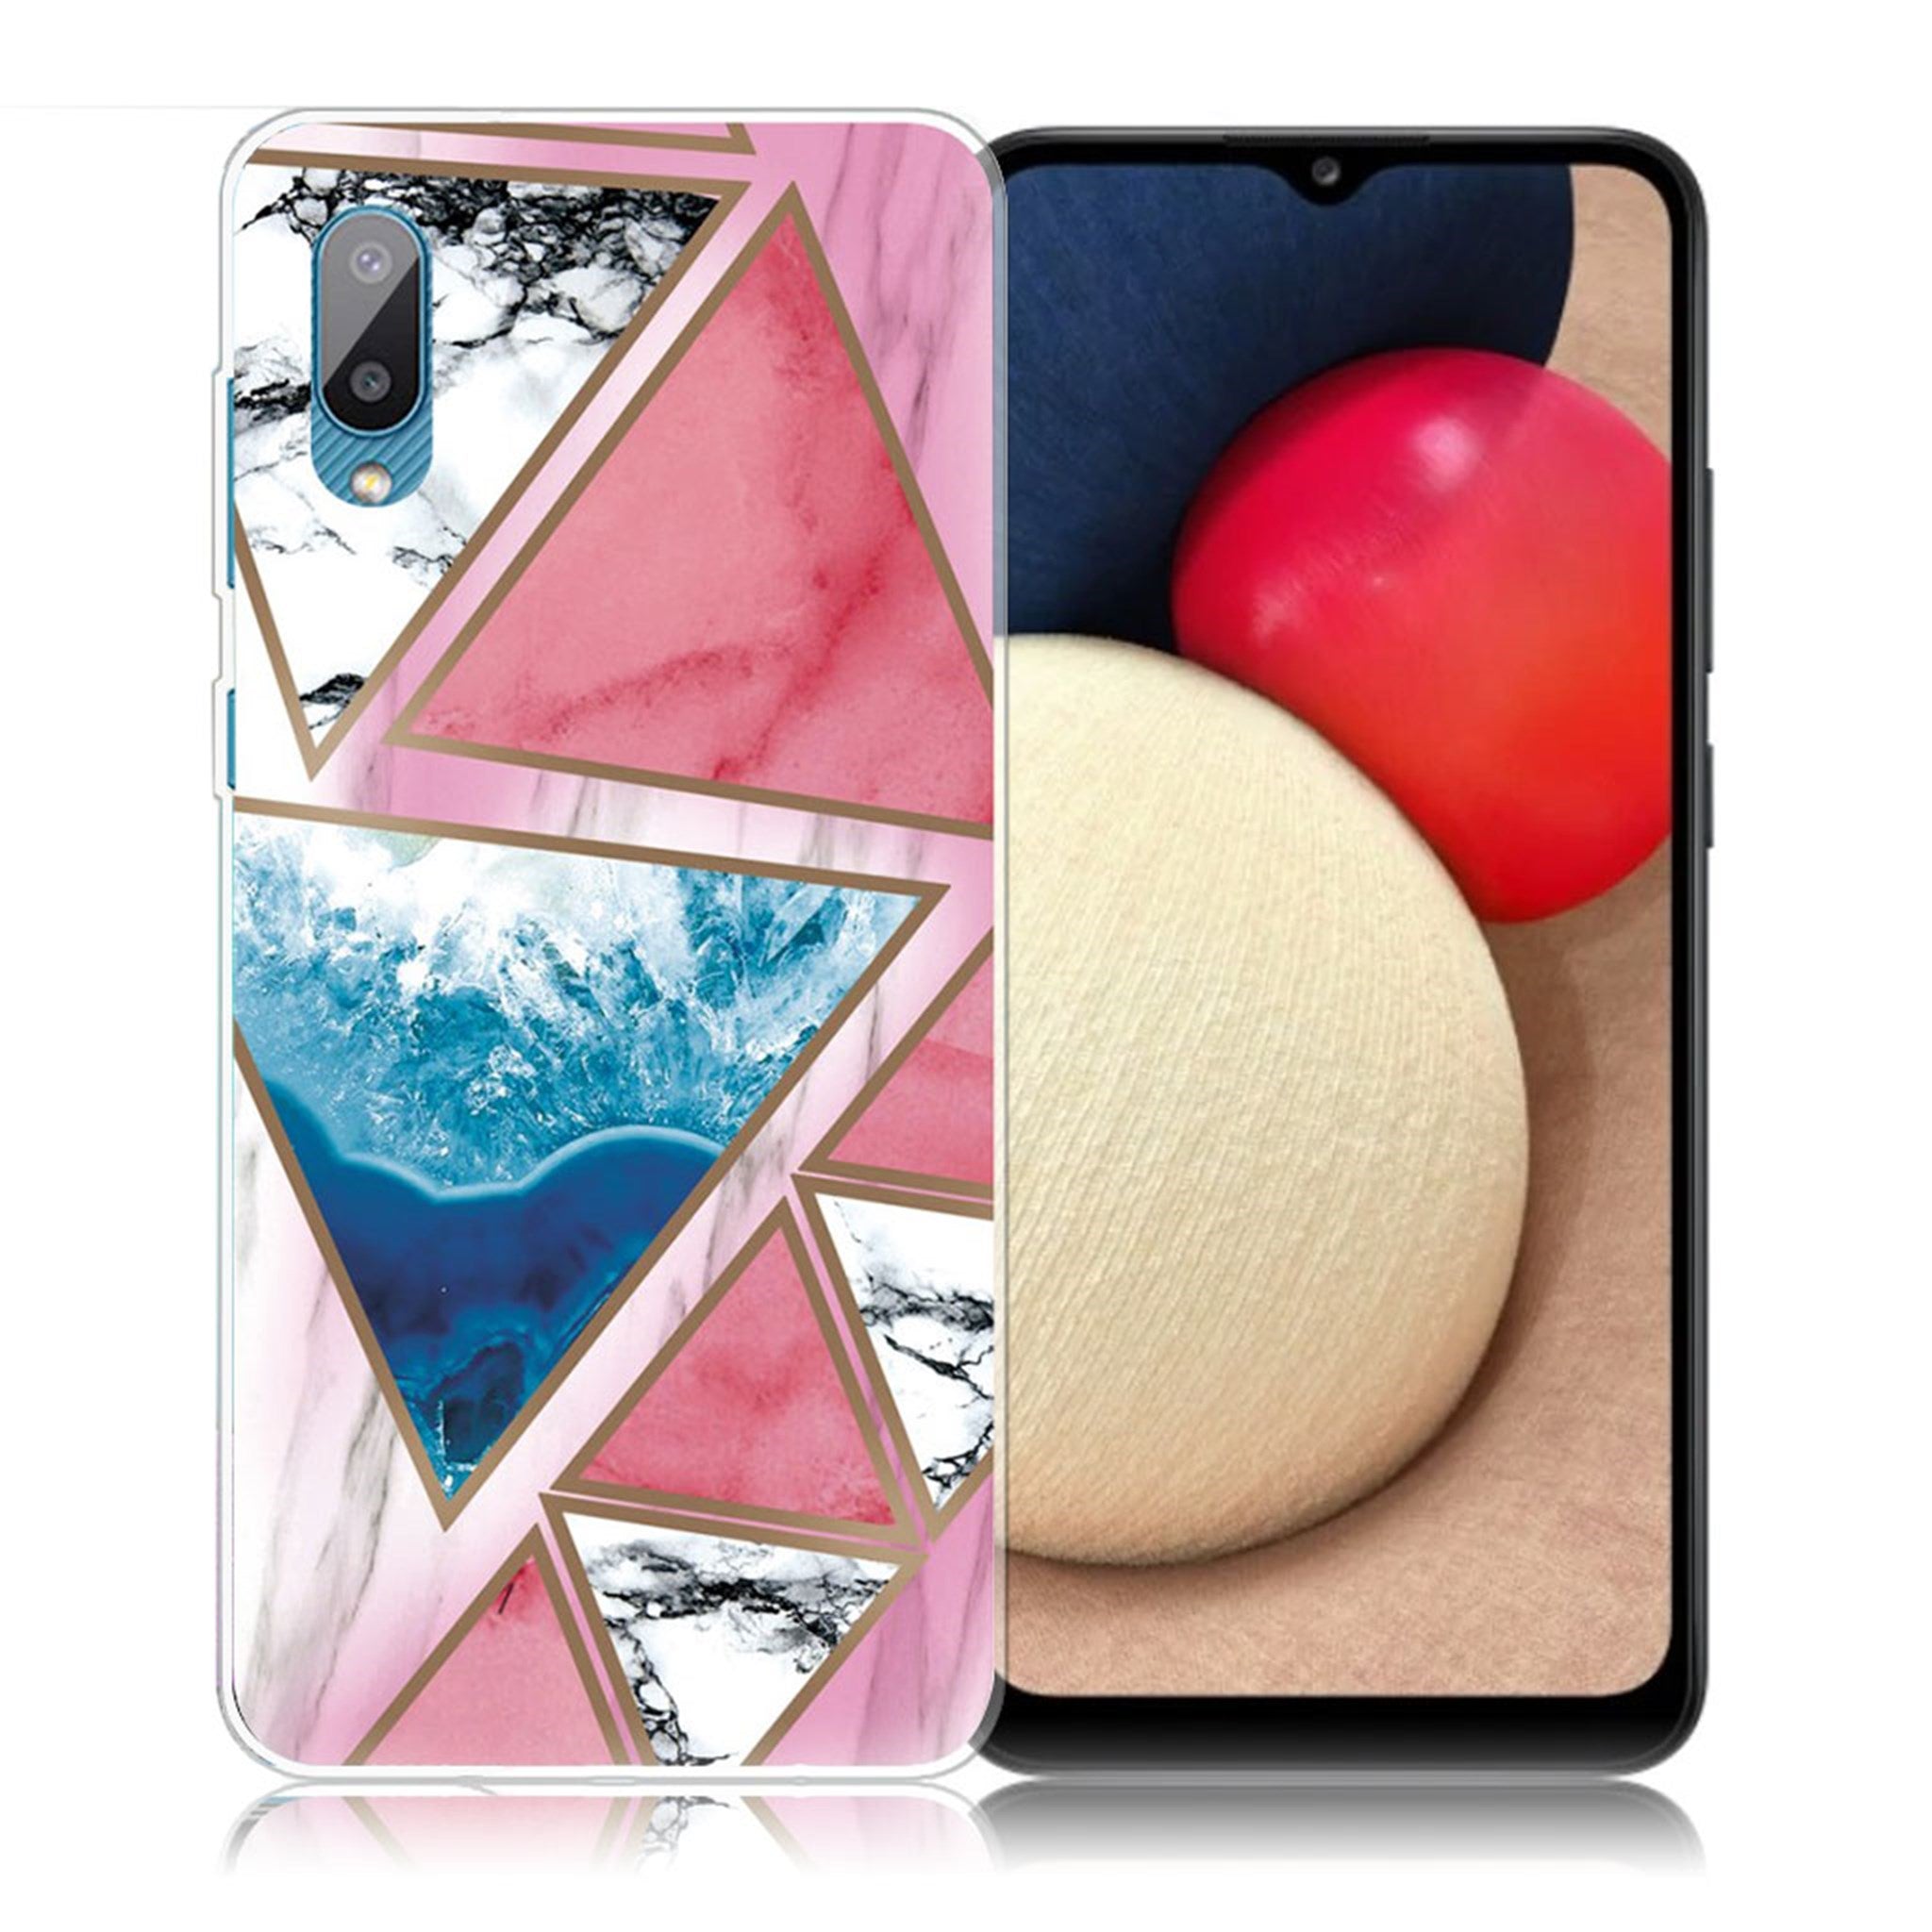 Marble Samsung Galaxy M02 / A02 case - White / Blue / Rose Triangle